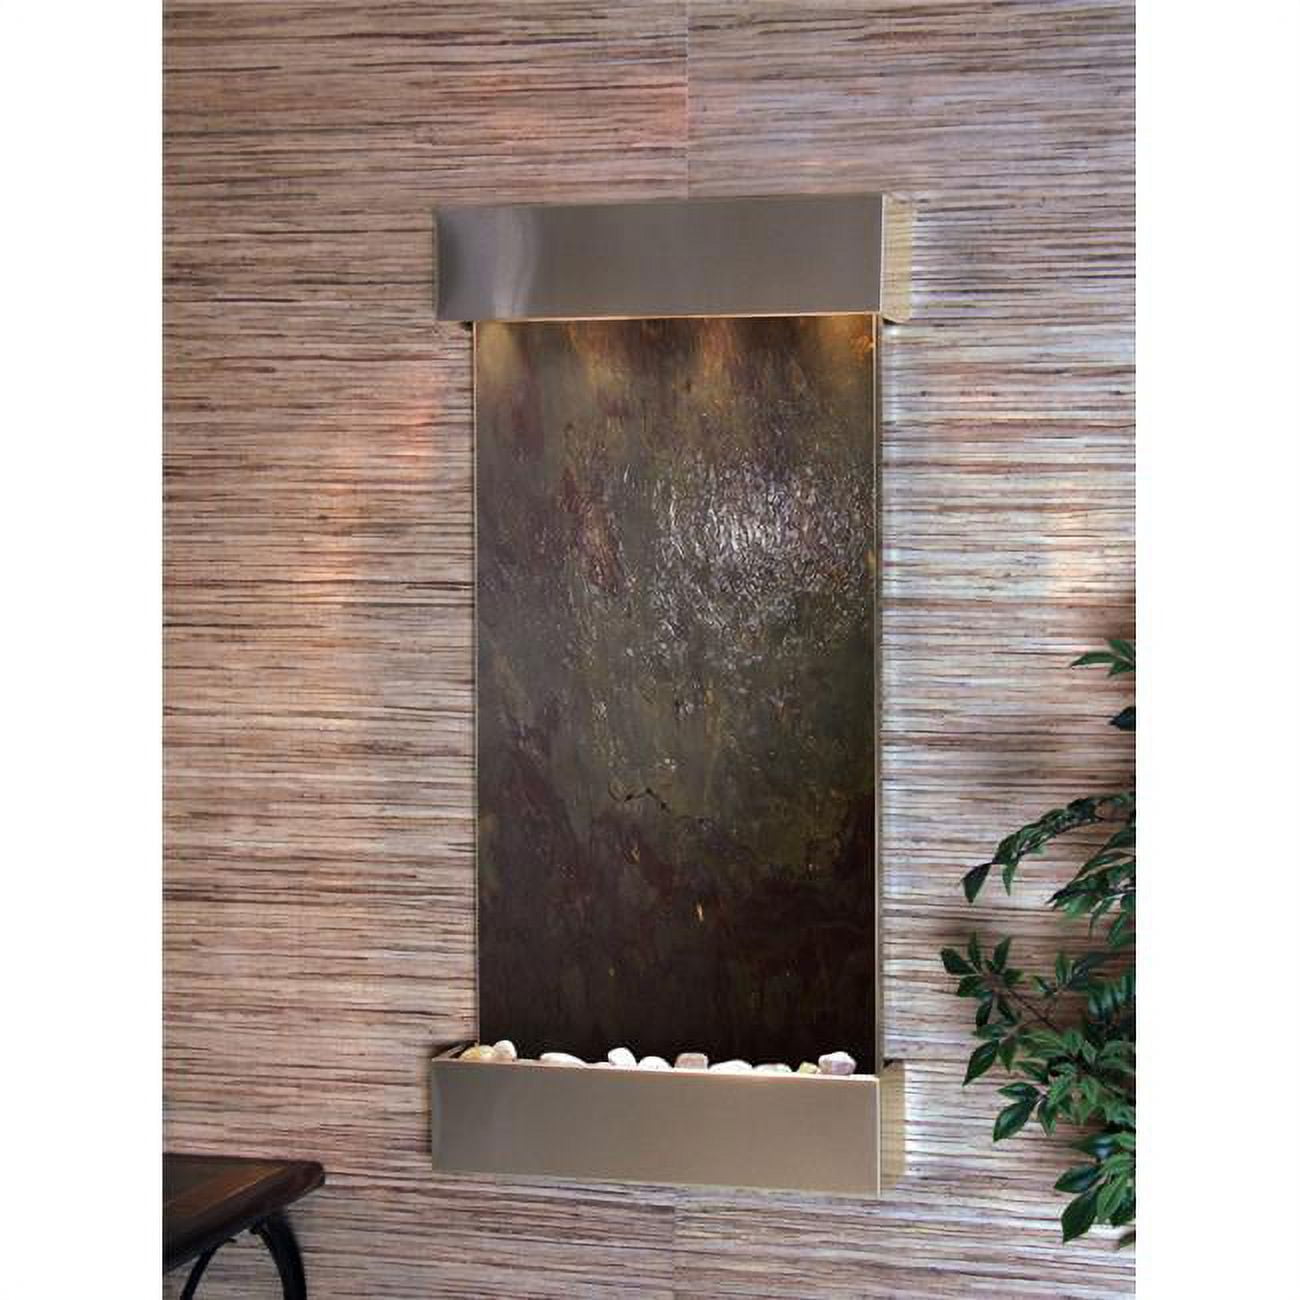 Adagio WCS2014 Whispering Creek Stainless Steel Multicolor Featherstone Wall Fountain